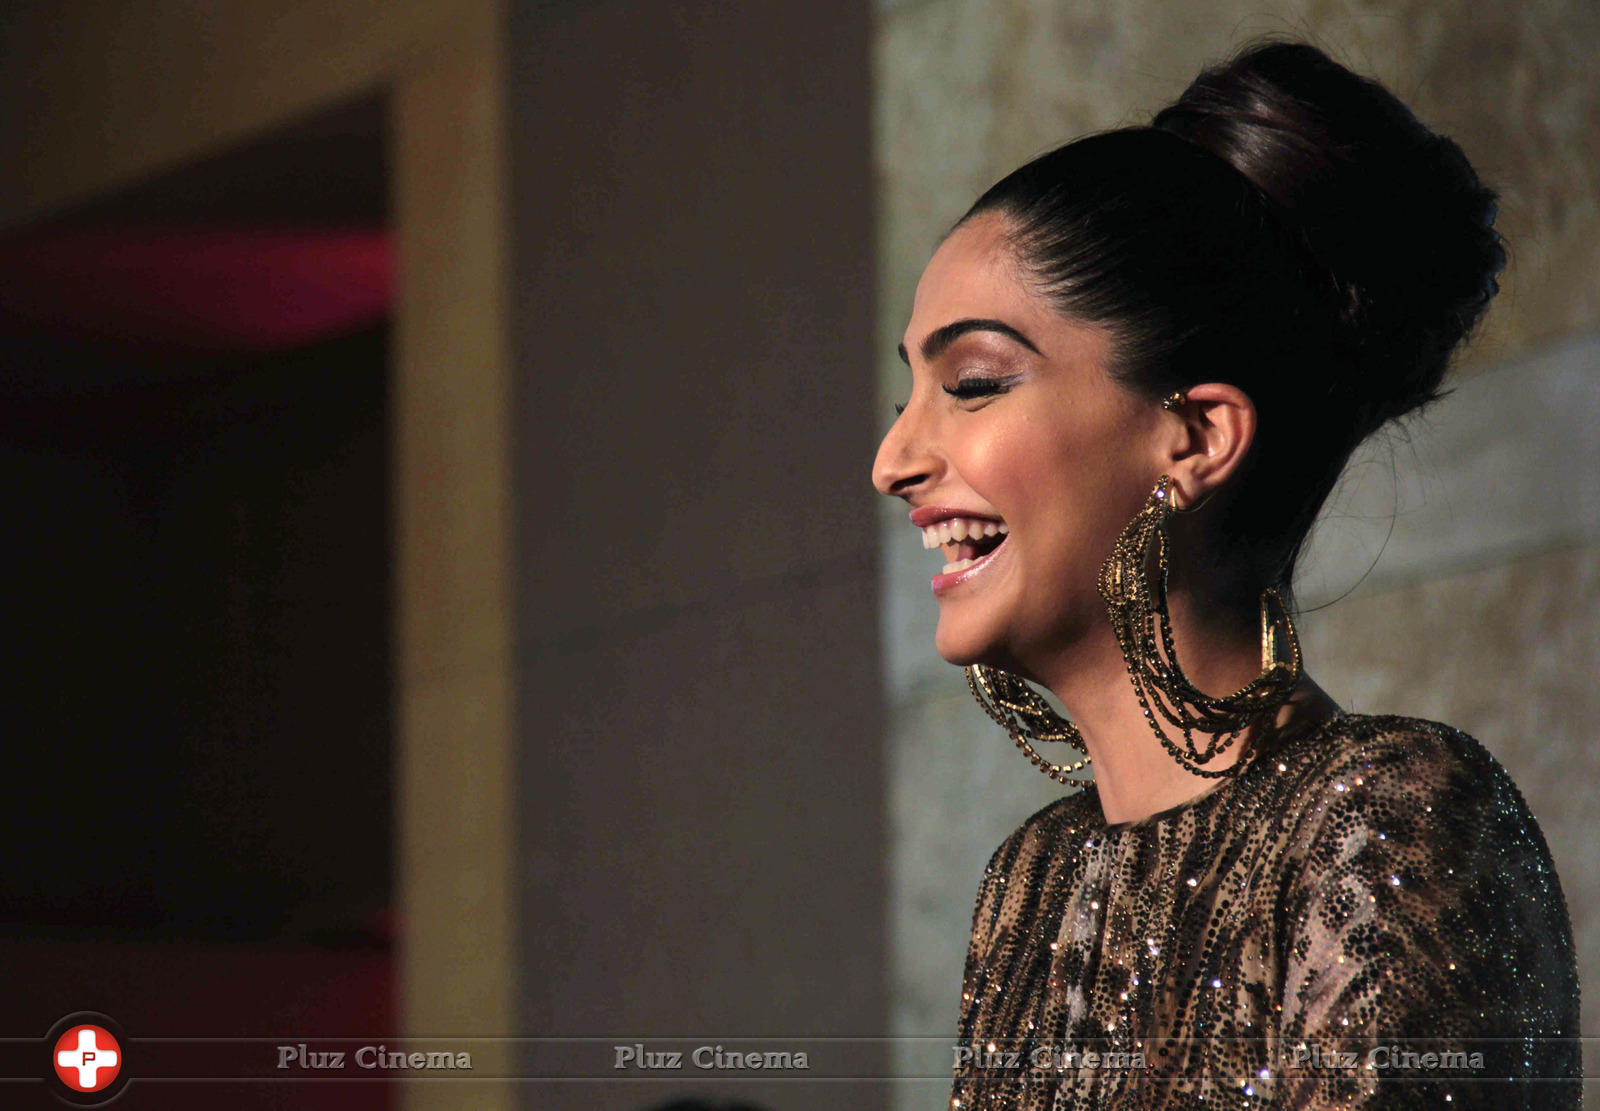 Sonam Kapoor Ahuja - GQ Man of the Year Award 2013 Photos | Picture 591315